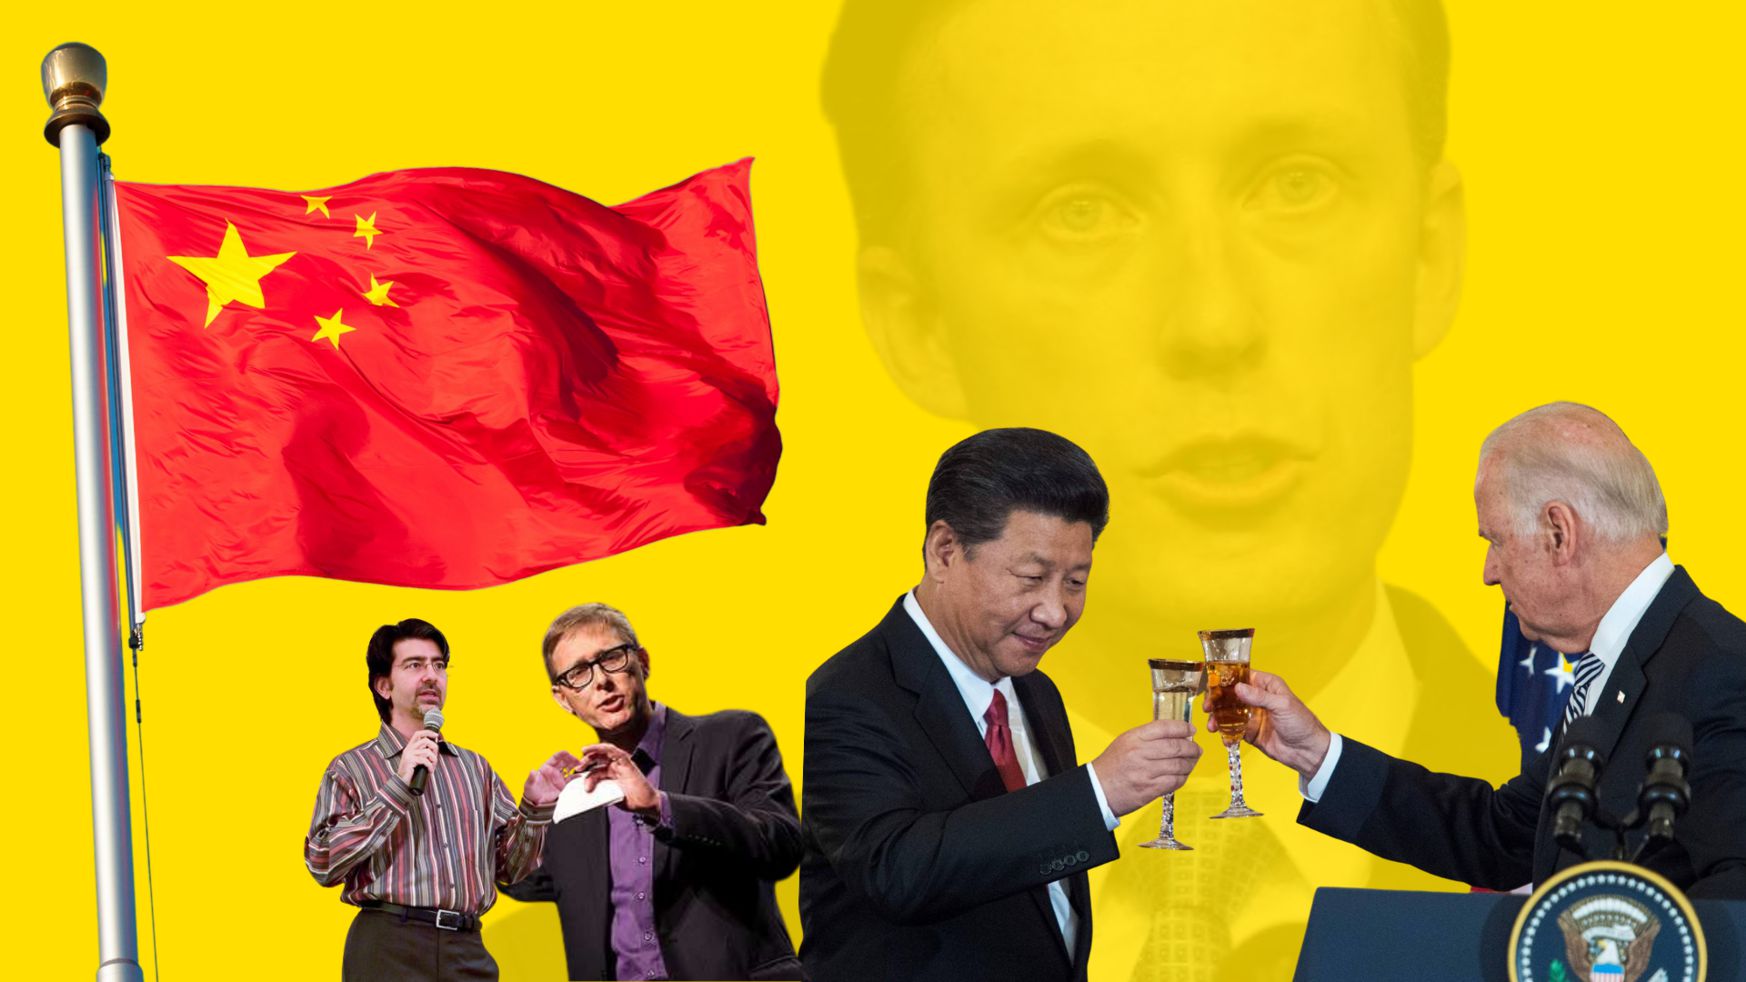 China’s State Propaganda Group Boasts Control Over Western Think Tanks